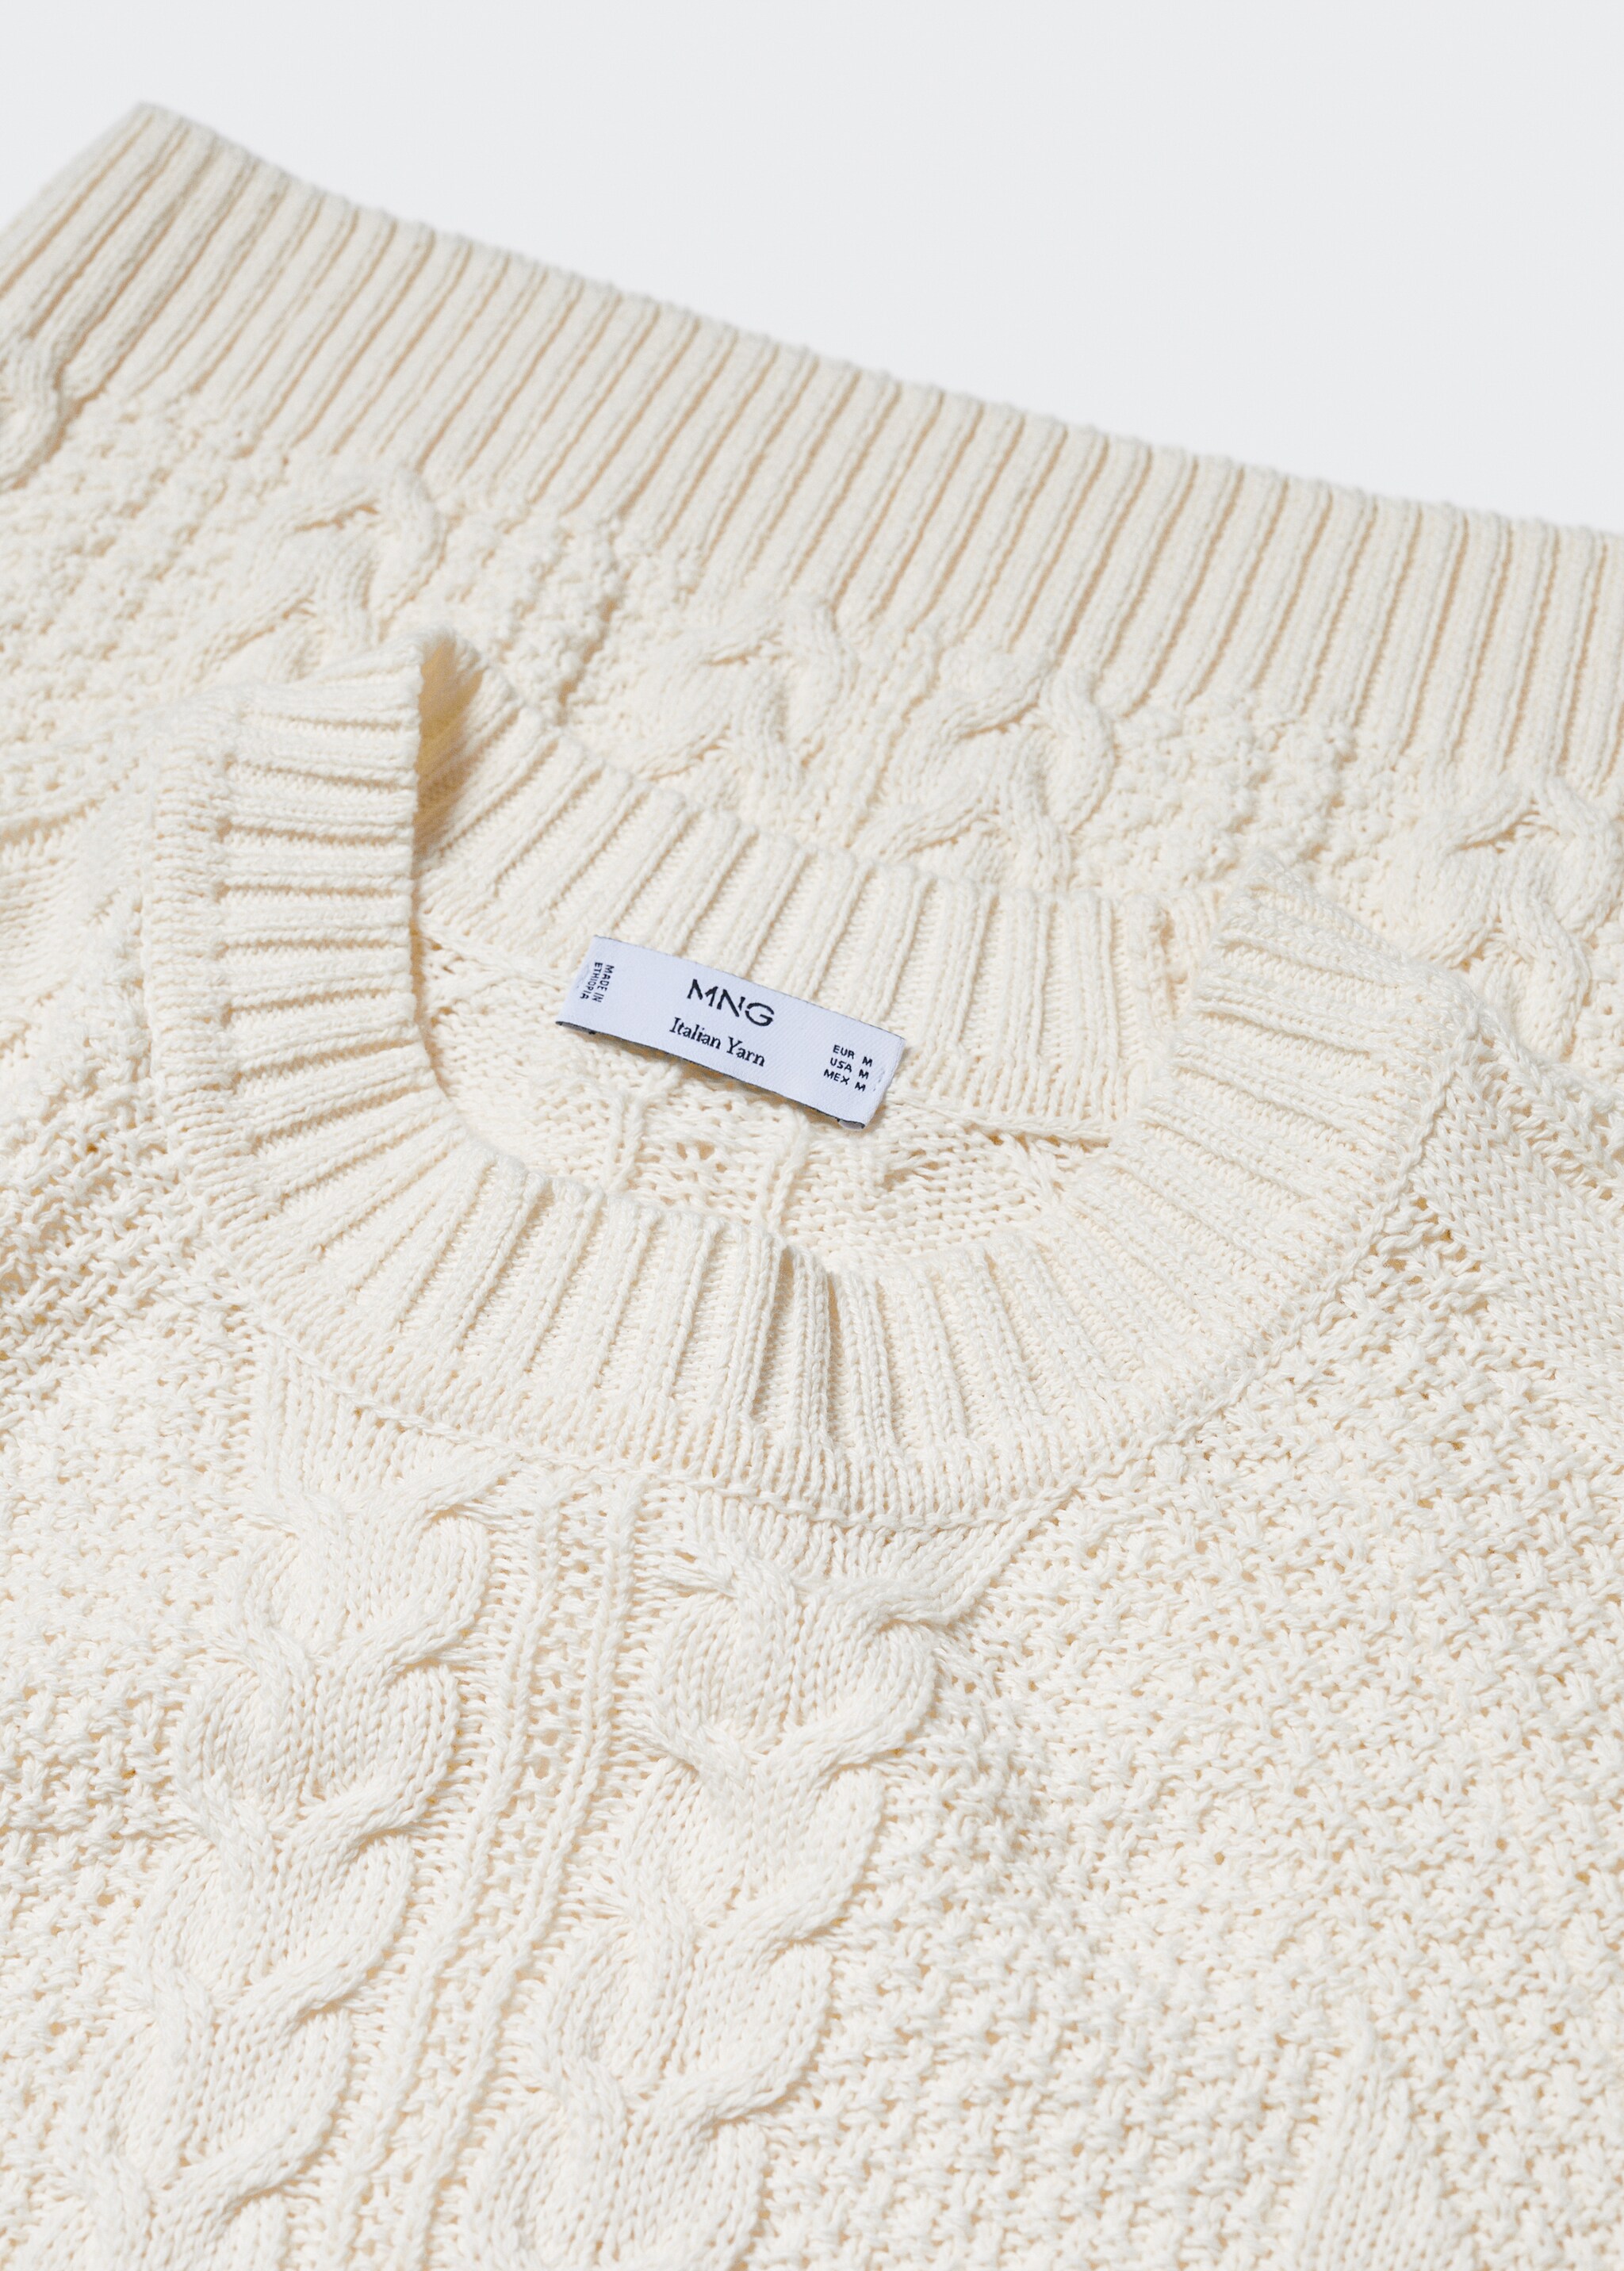 Braided cotton sweater - Details of the article 8